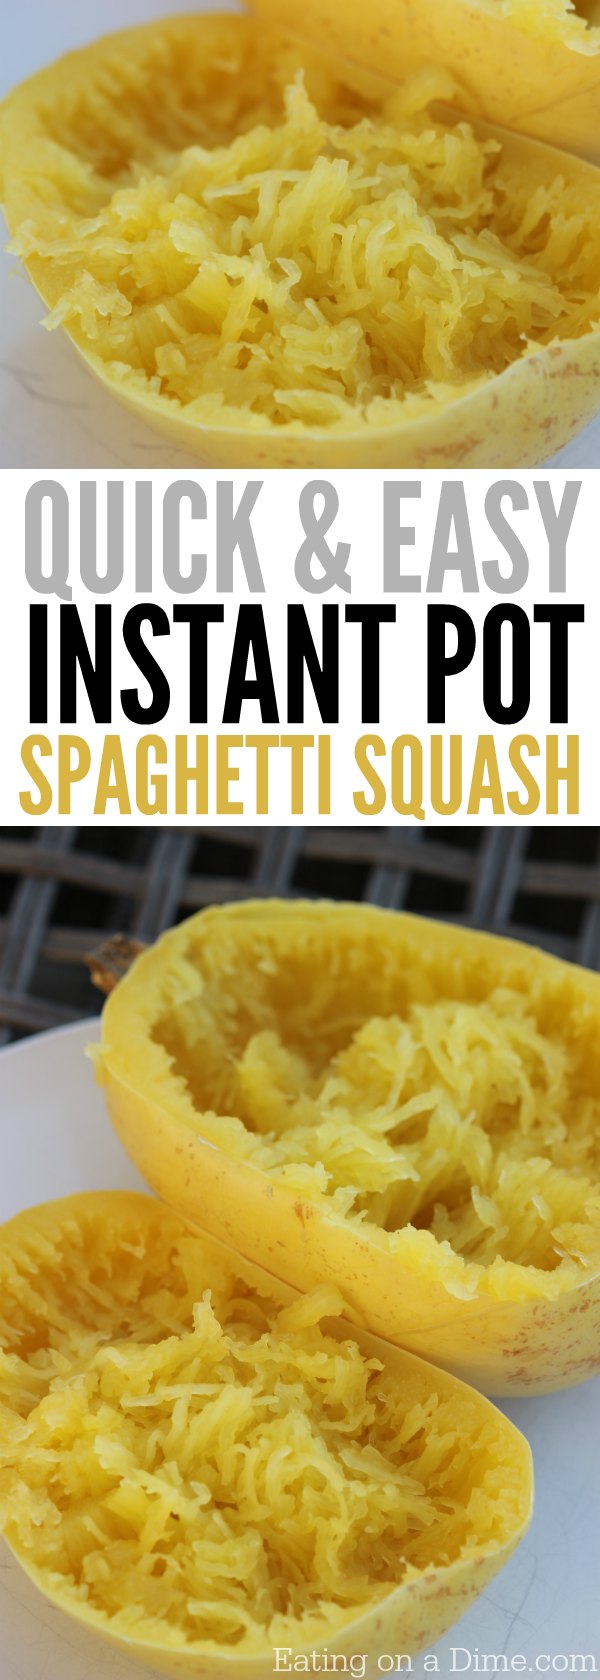 Quick and Easy Instant Pot Spaghetti Squash Recipe - Eating on a Dime